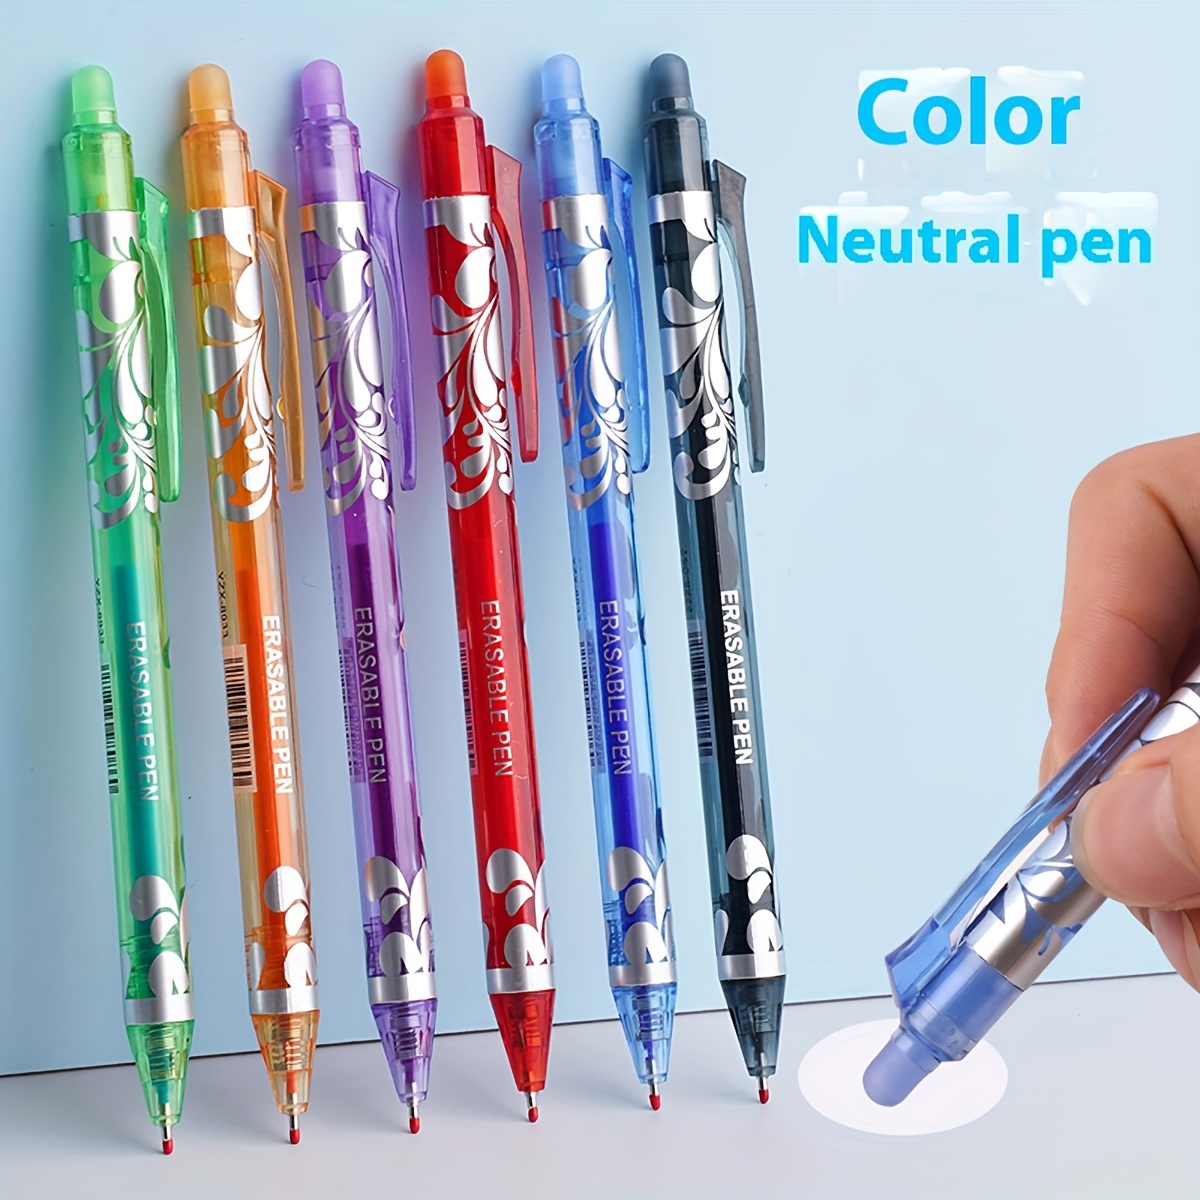 

Erasable Retractable Ballpoint Pen Set With Refills, 12-pack, 0.5mm Extra Fine Point, Plastic Oval Body, Assorted Colors, For Students Back To School Use